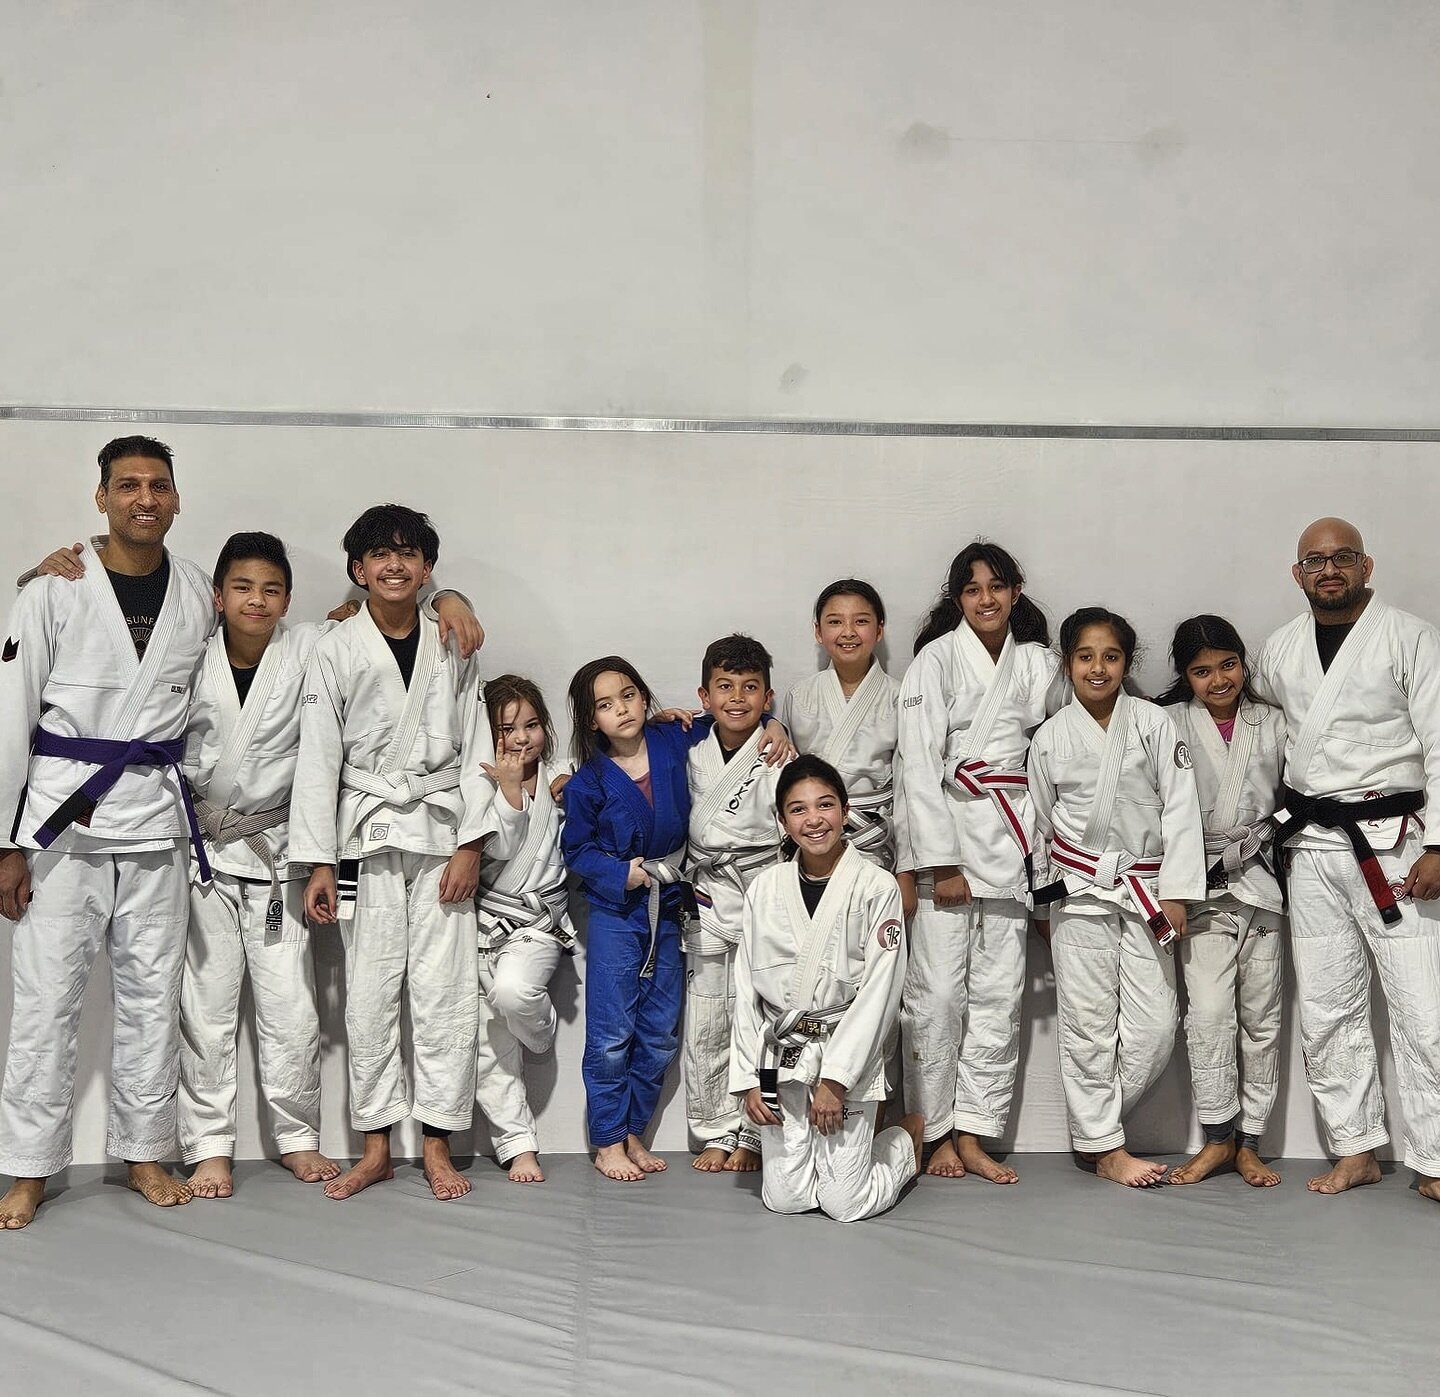 Awesome Easter Jiu Jitsu Training today @actionreactionmma @cicerocosthaoficial 

Big thank you to @fernandozulick @arwinfm @ethan.jiujitsu @princessj_jiujitsu for running an awesome Competition class for the youth 

AND

to all our students and pare